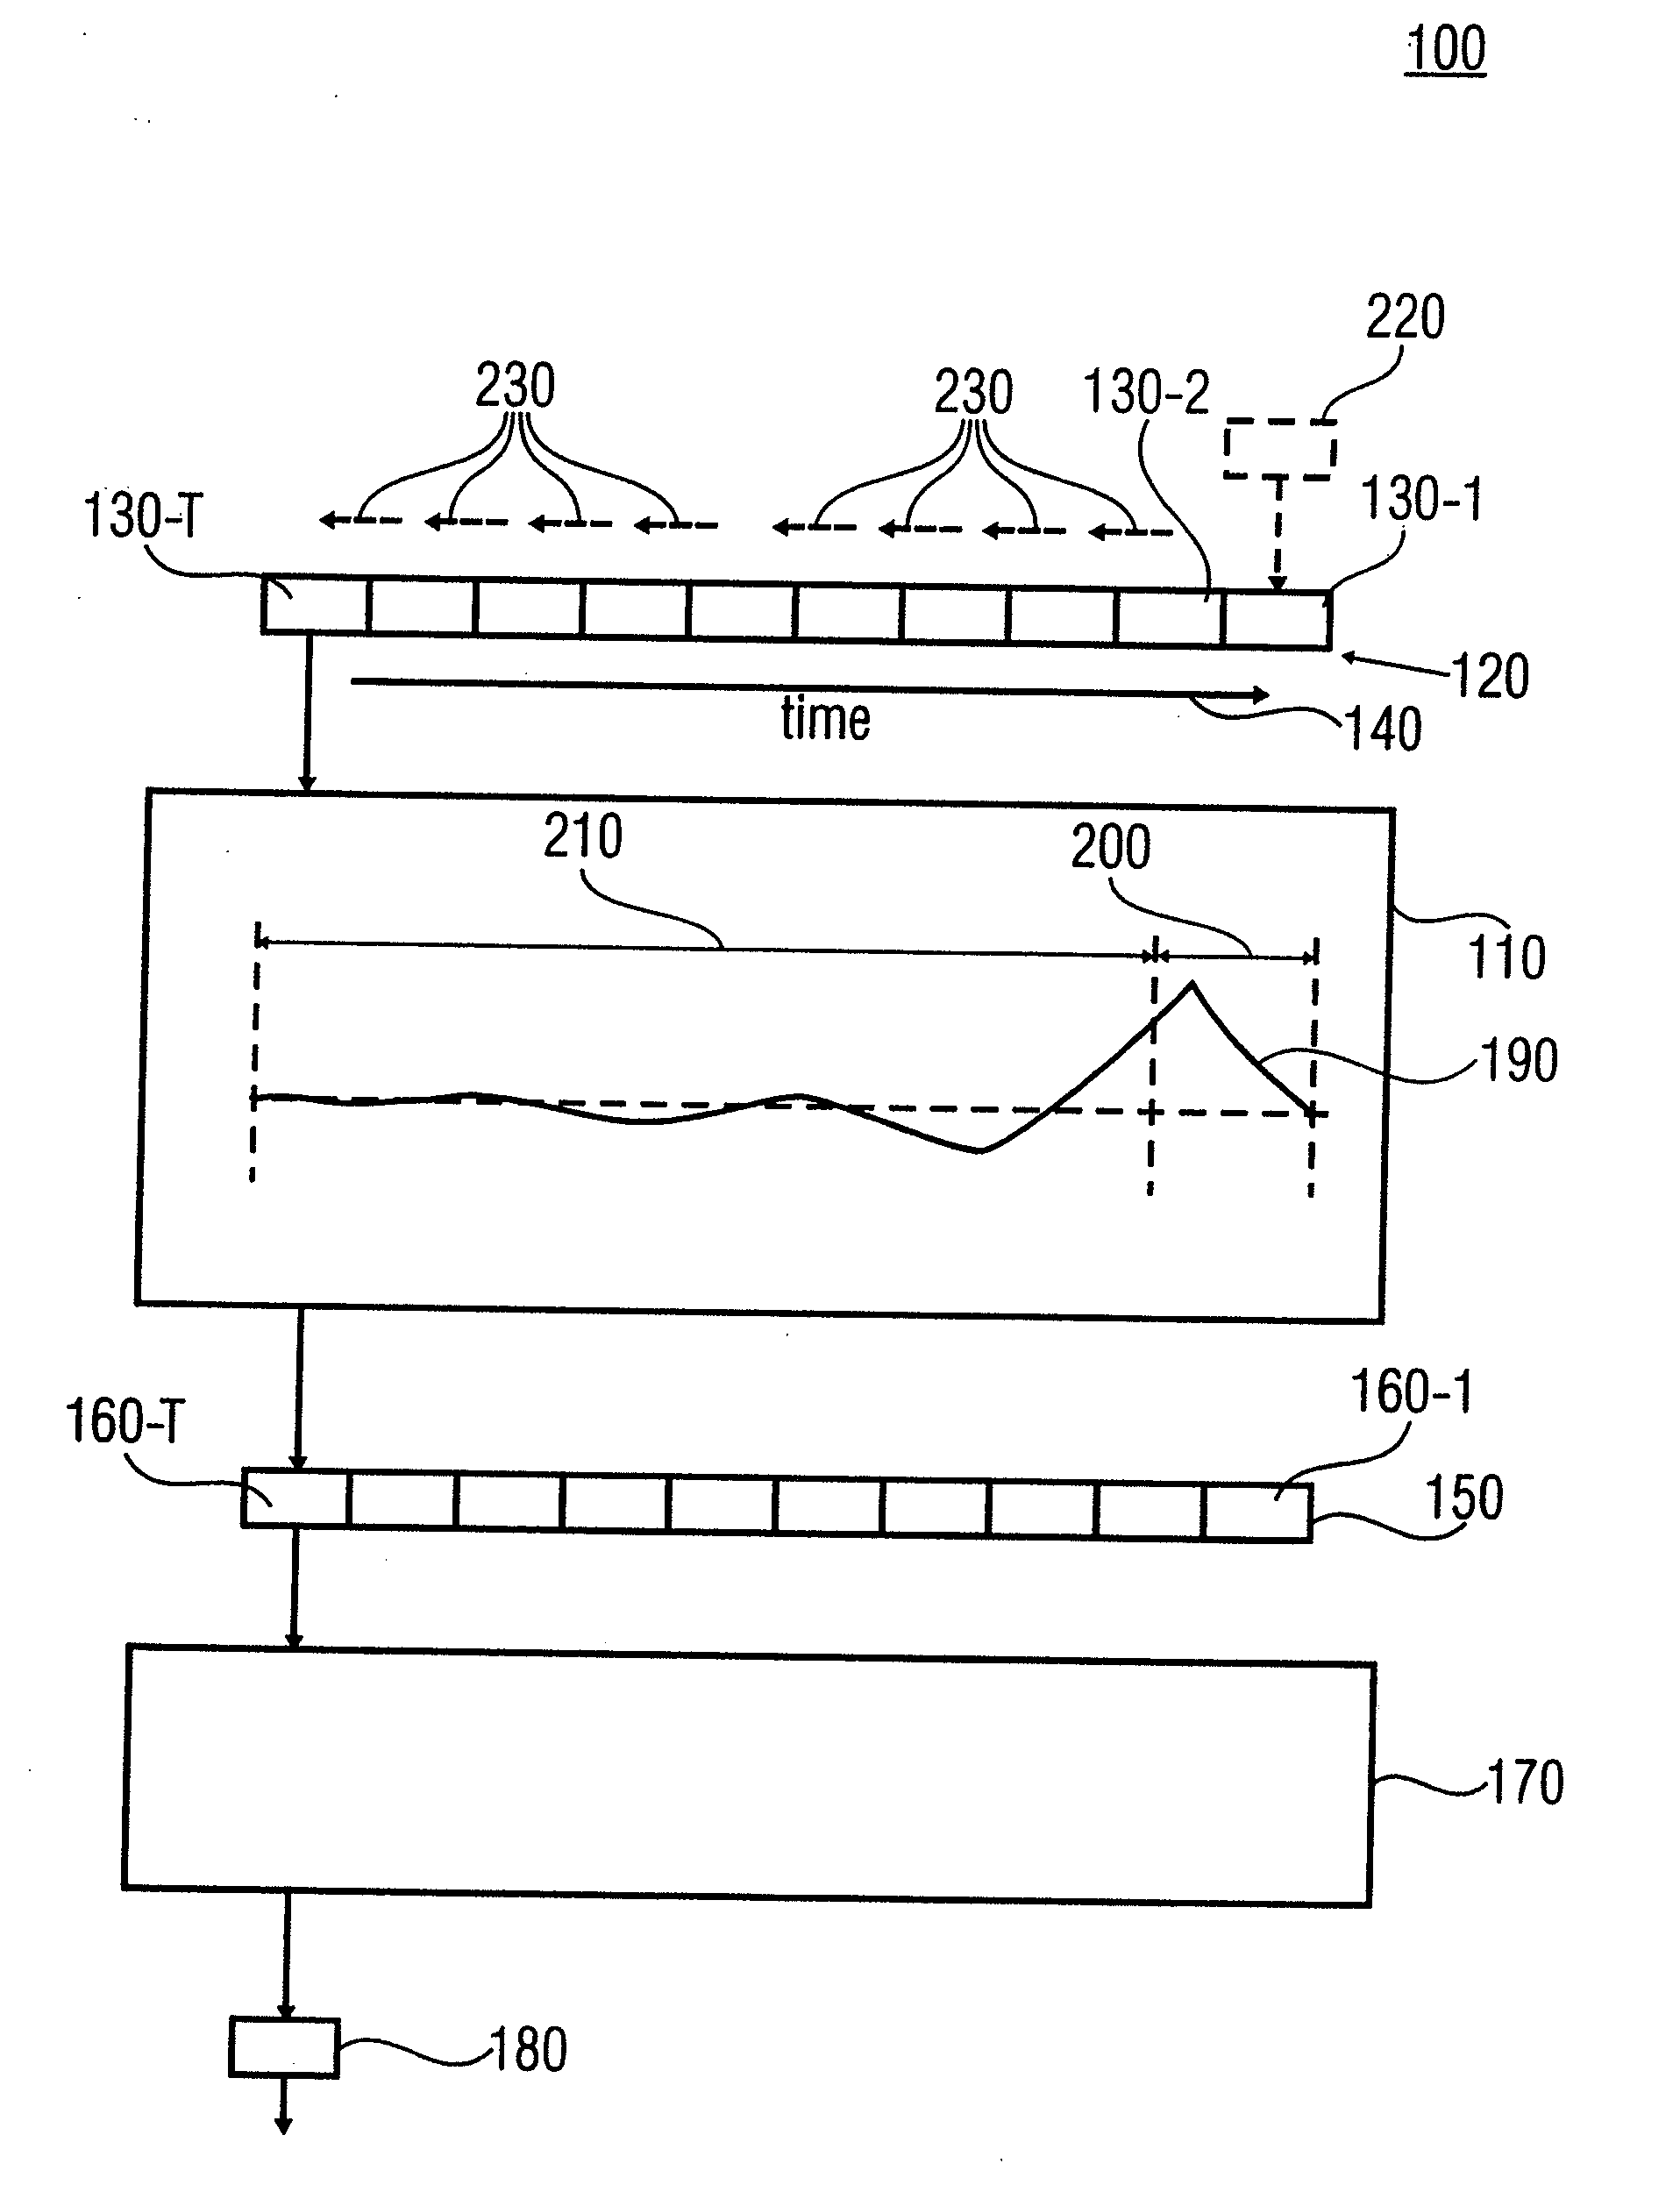 Apparatus and Method for Generating Audio Subband Values and Apparatus and Method for Generating Time-Domain Audio Samples